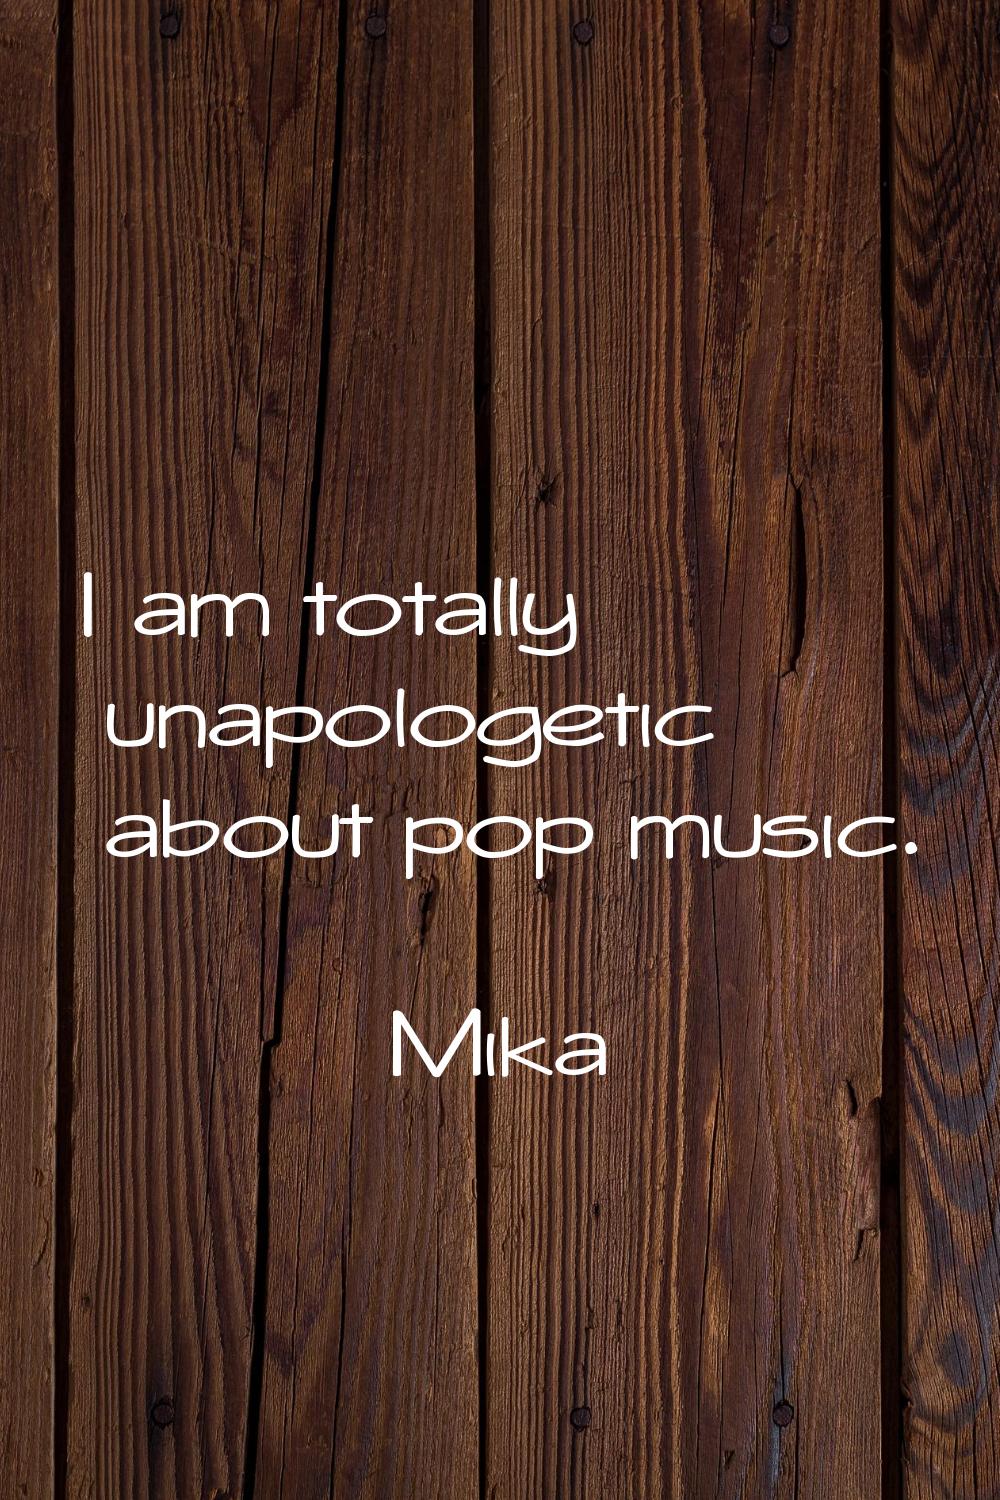 I am totally unapologetic about pop music.